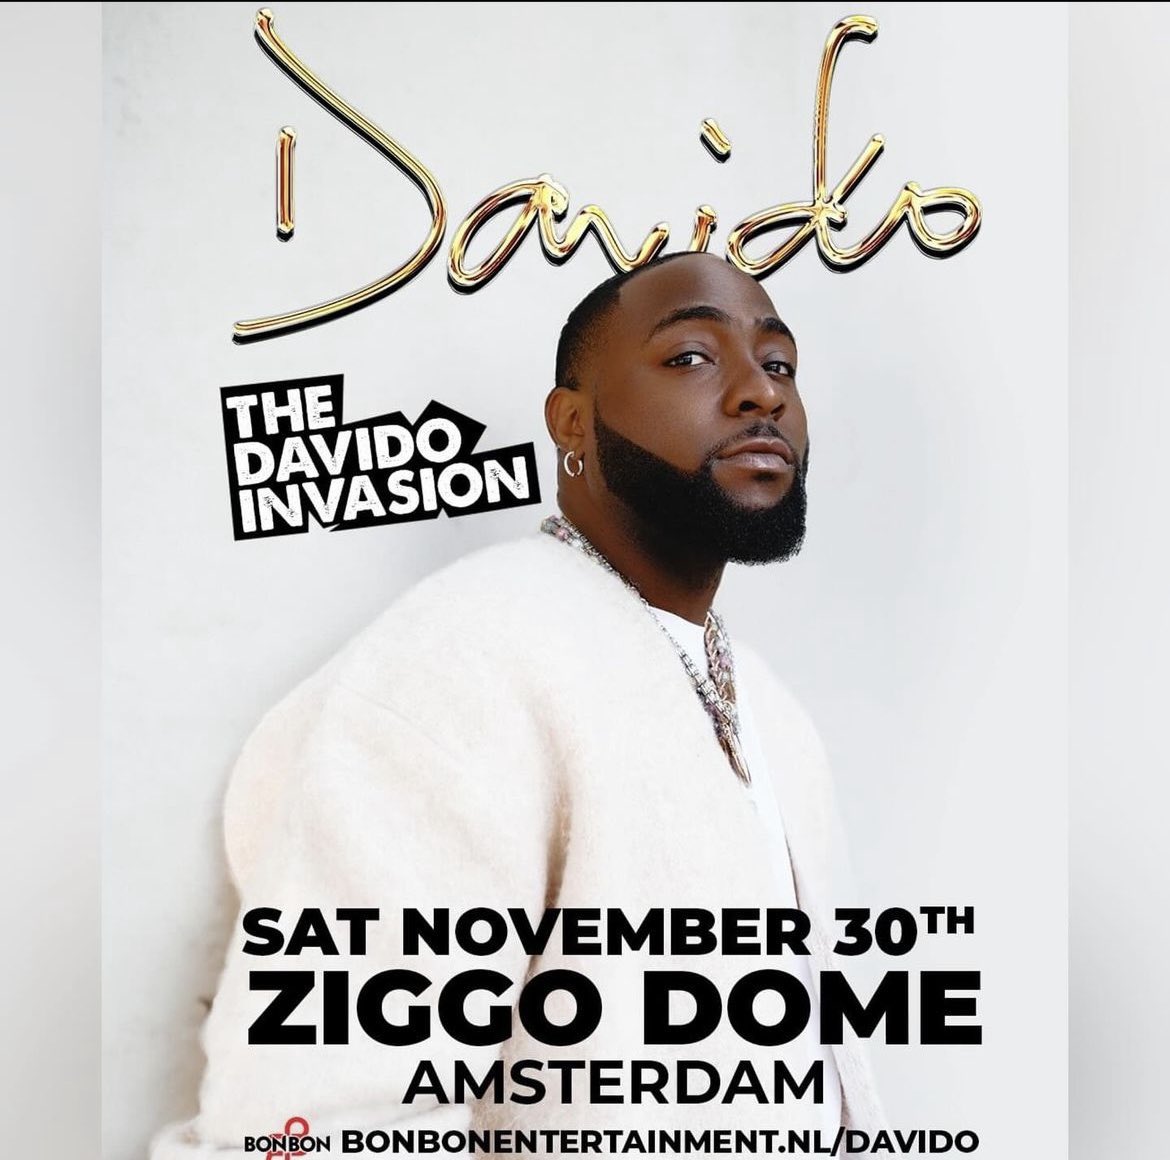 Davido, the three time Grammy Nominated superstar, brings his Timeless Invasion to Amsterdam’s Ziggo Dome on November 30th. Tickets sale starts Thursday April 25th 🇳🇱

Capacity: 17,000